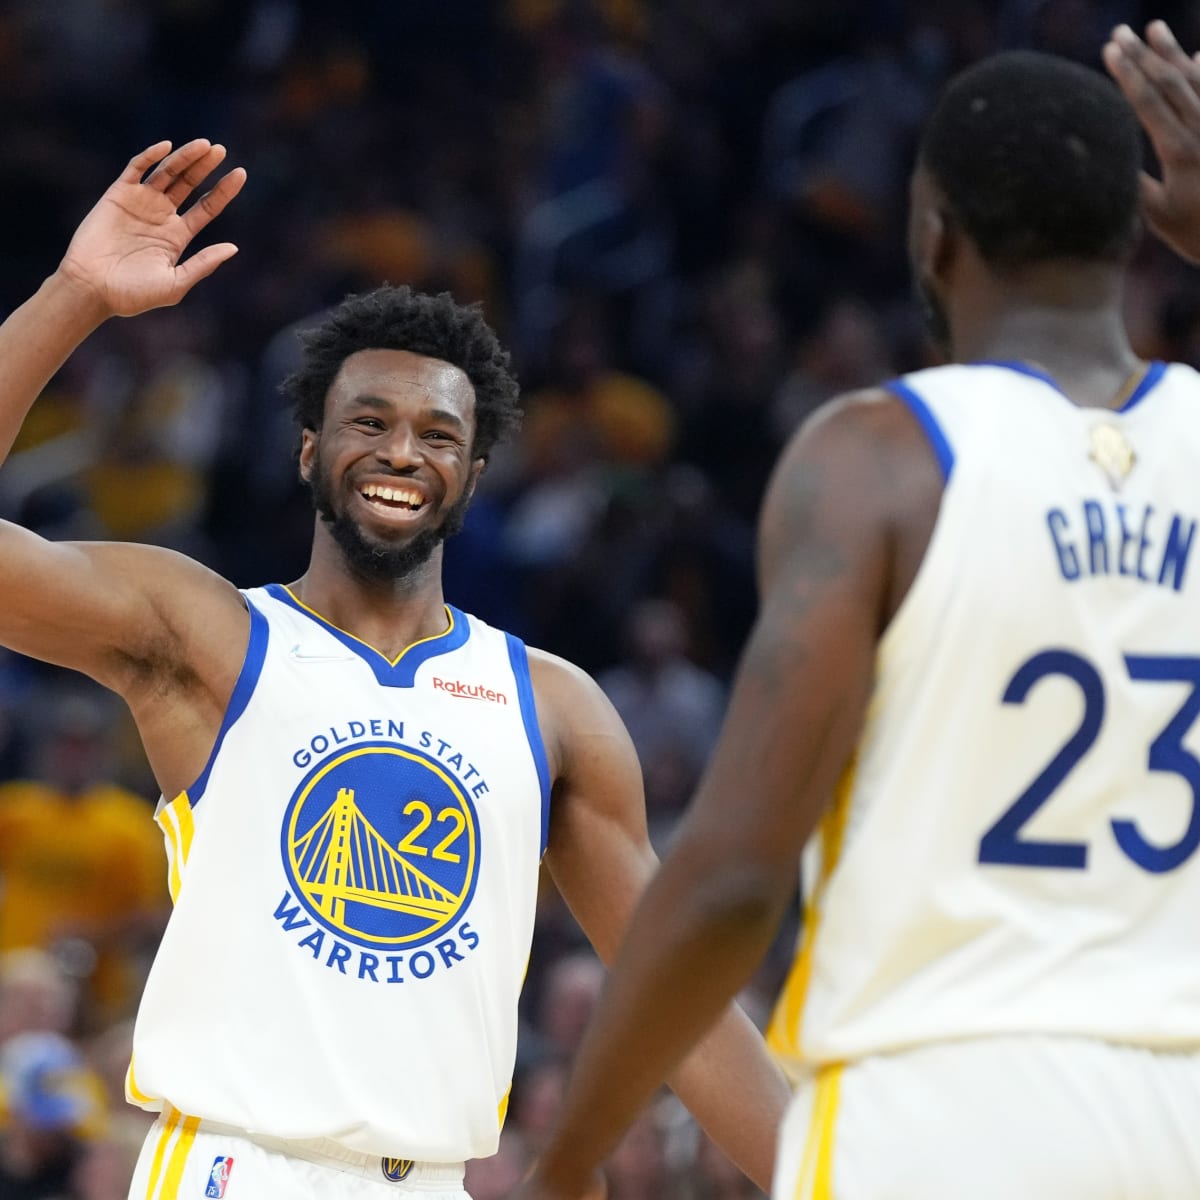 NBA: Andrew Wiggins outduels D'Angelo Russell, Wolves beat Warriors